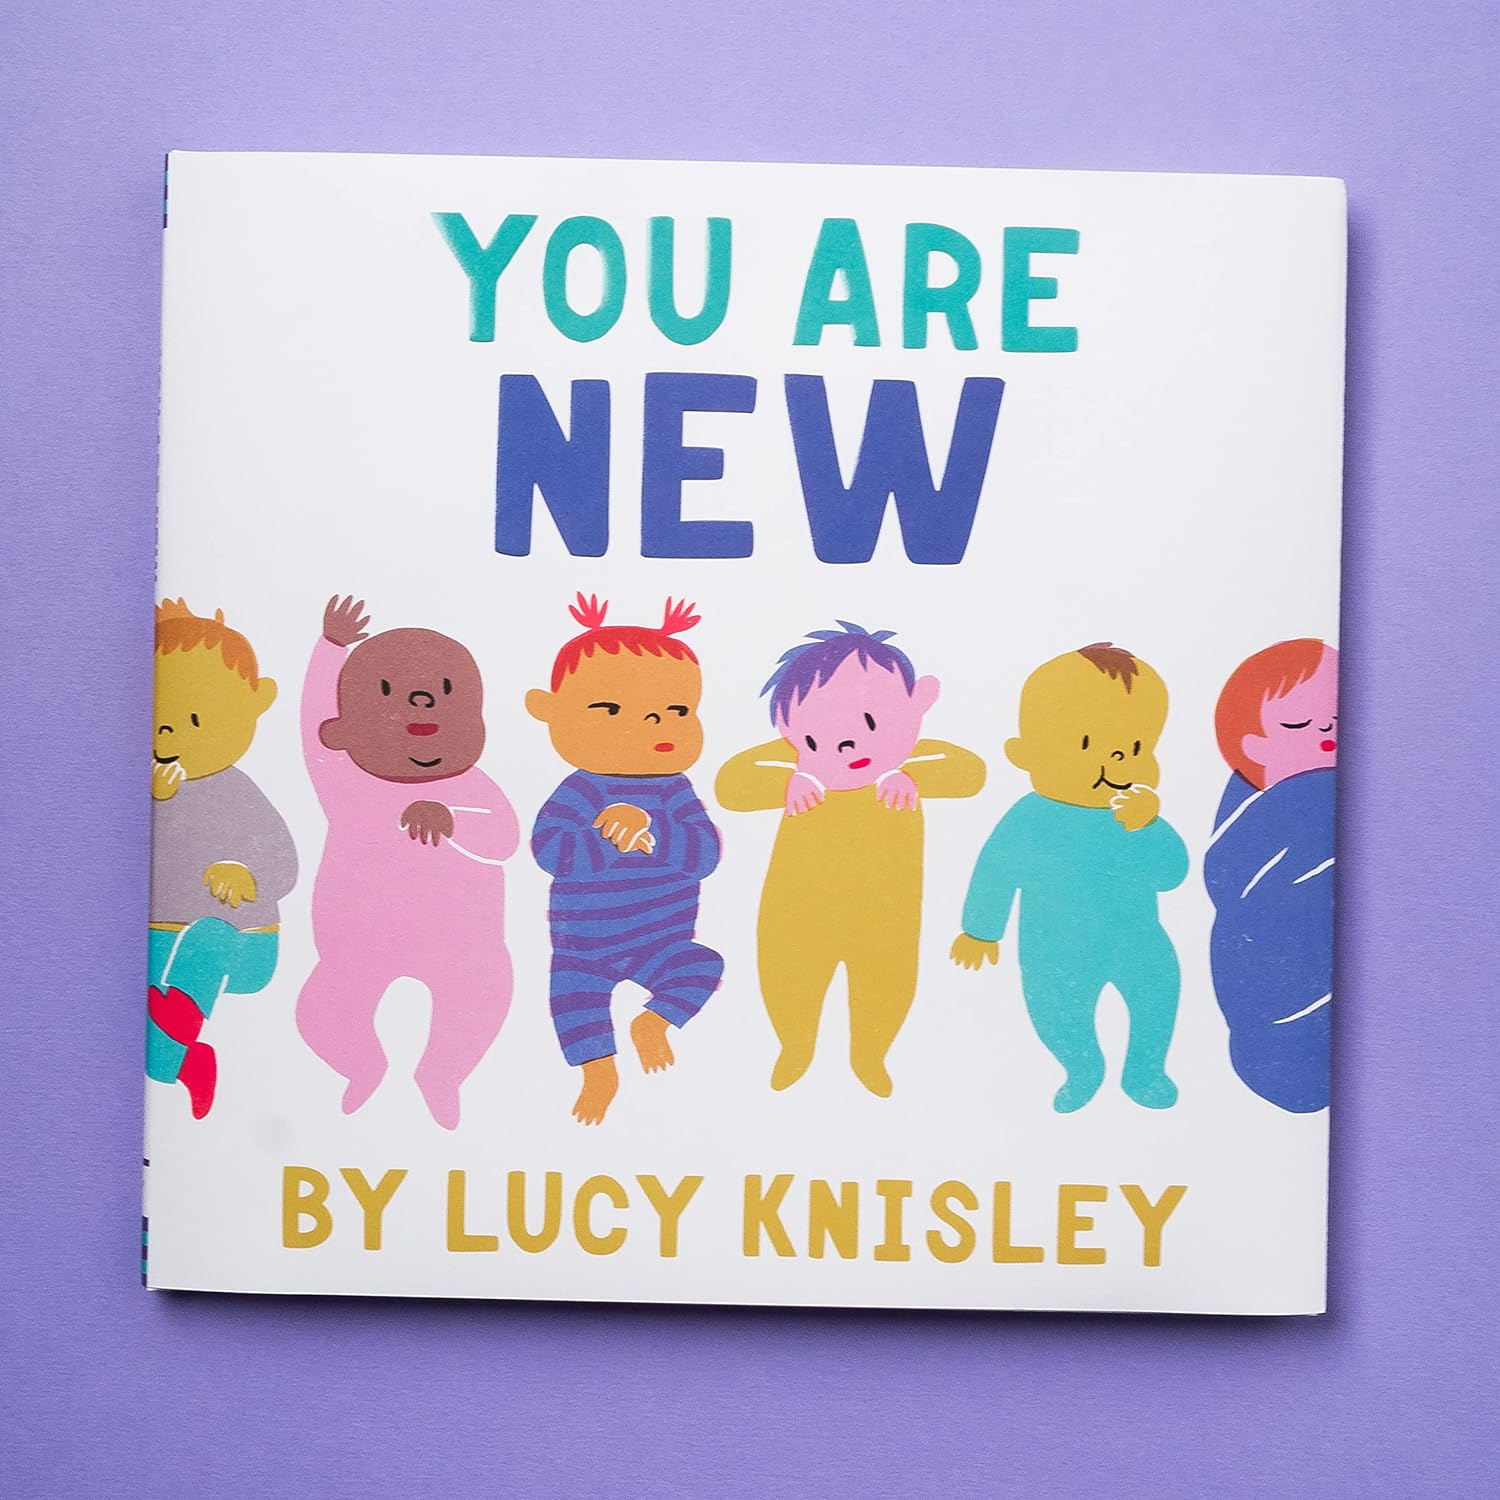 COVER ART OF BOOK SHOWING SIX BABIES WEARING DIFFERENT OUTFITS ALL L AYING DOWN IN DIFFERENT POSITIONS.